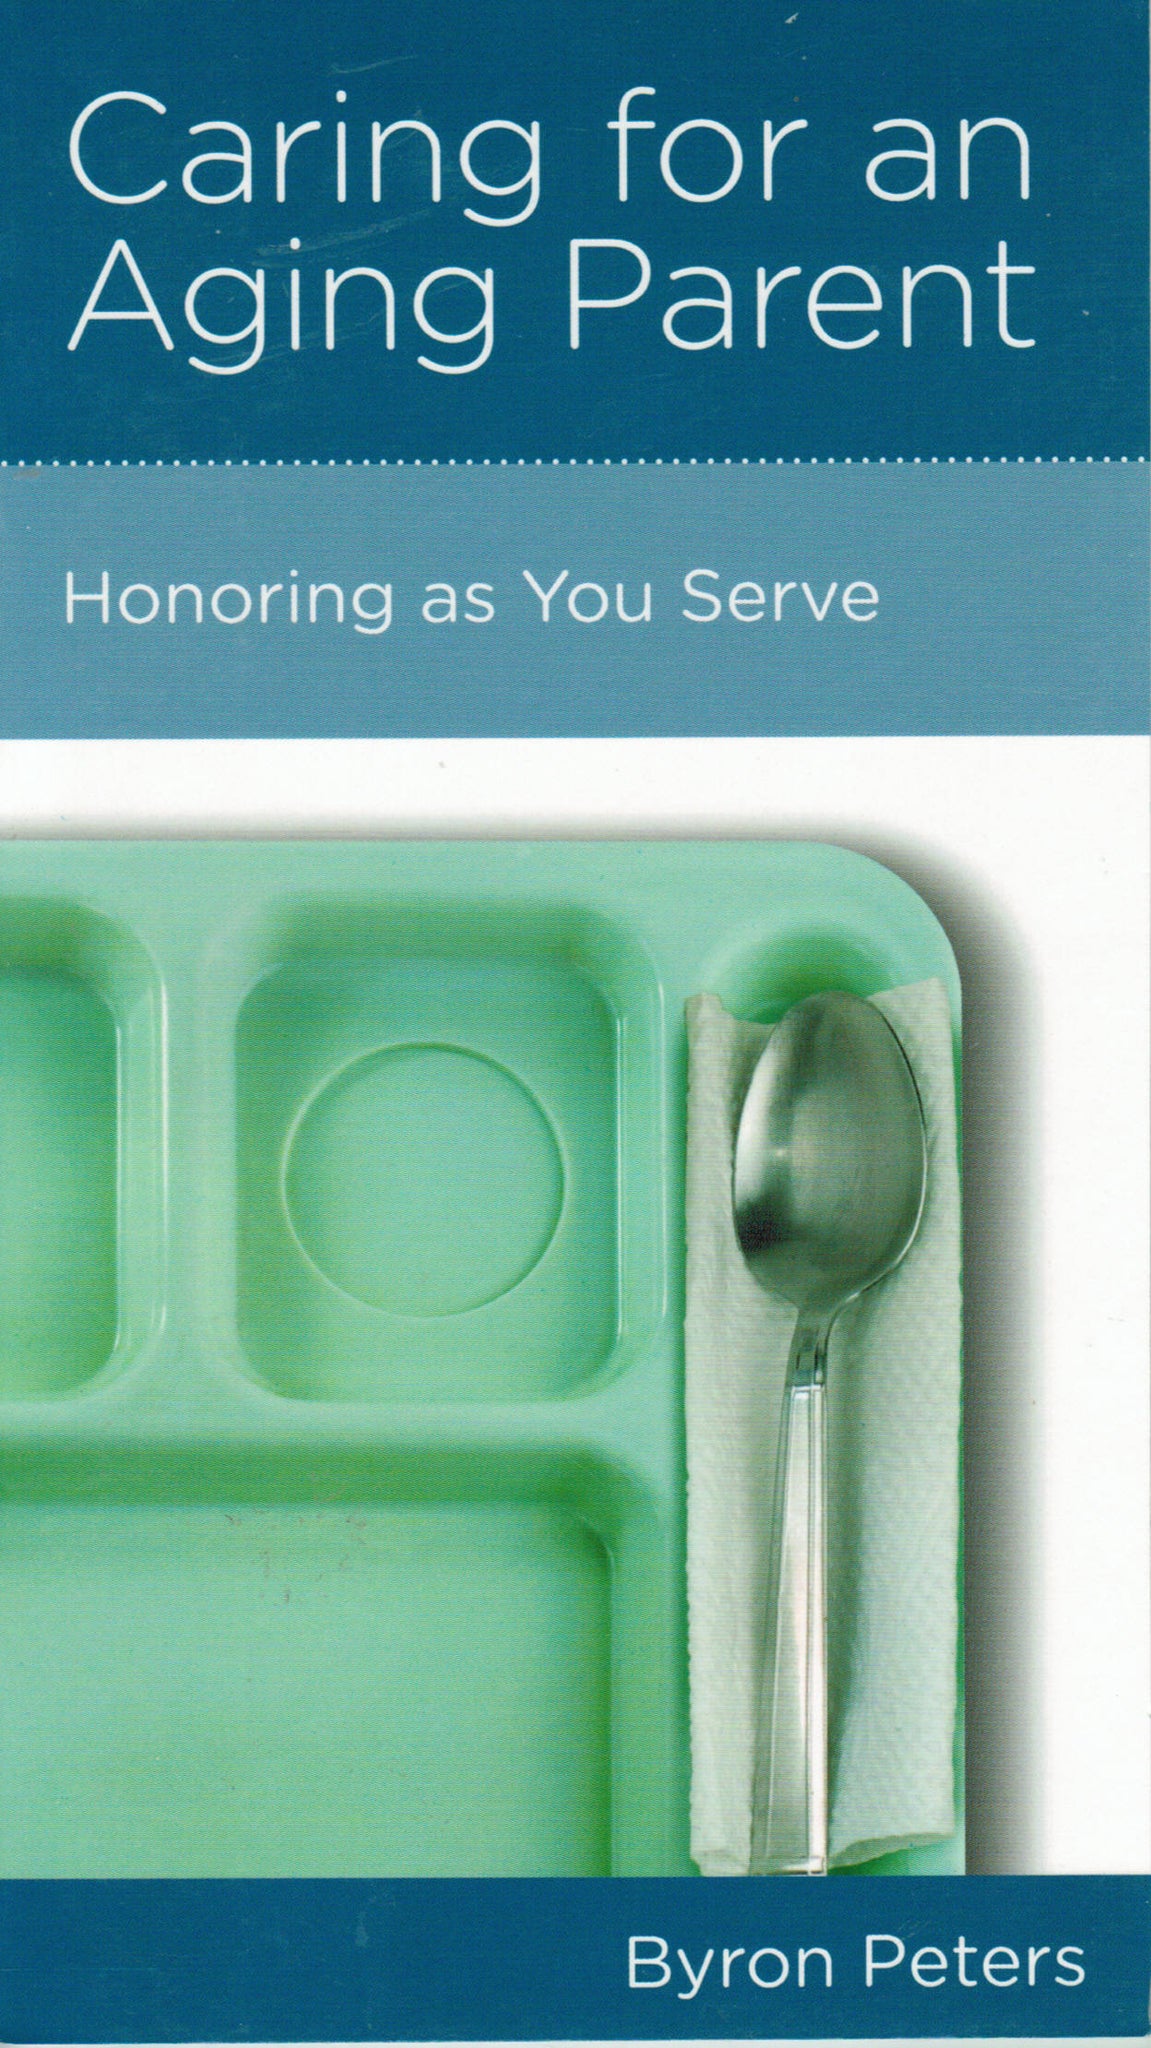 NewGrowth Minibooks - Caring for an Aging Parent: Honoring as You Serve